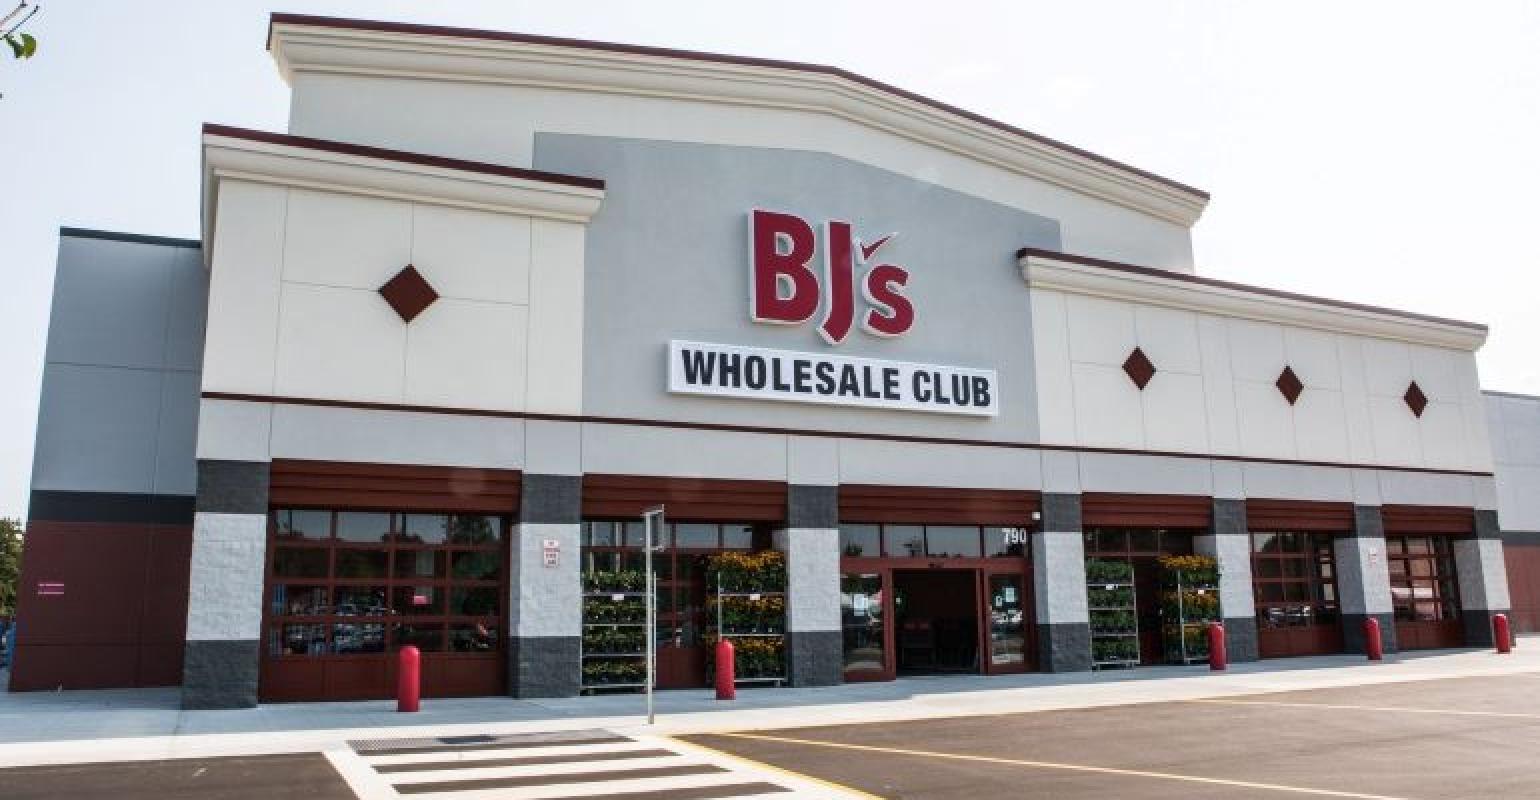 Bj S Wholesale Club Expands Delivery Of Alcohol Supermarket News